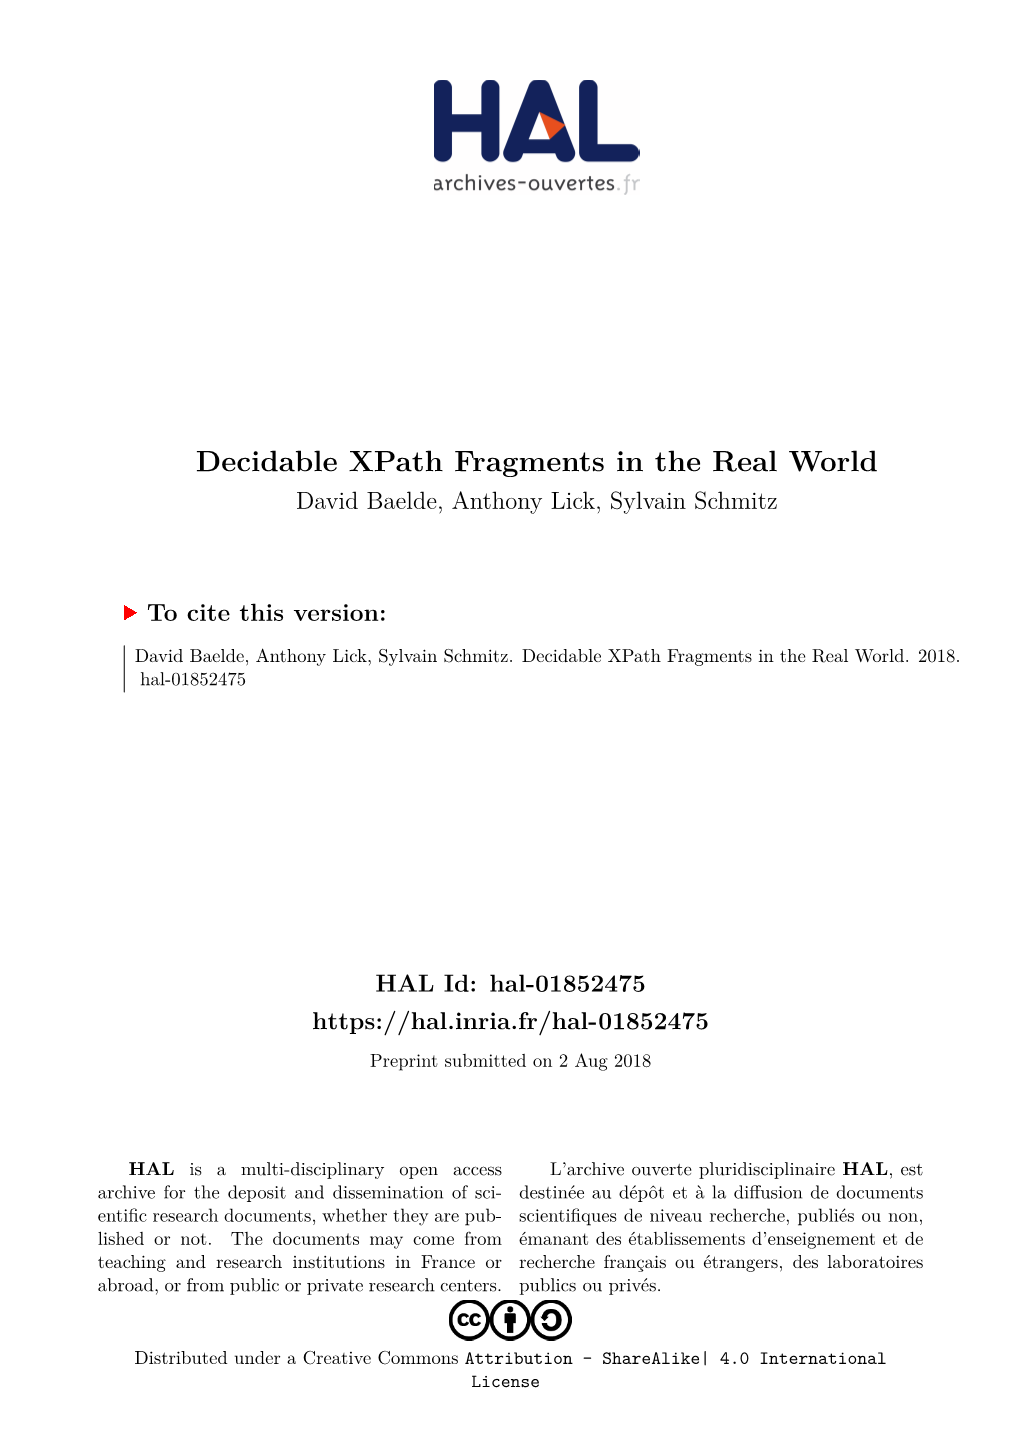 Decidable Xpath Fragments in the Real World David Baelde, Anthony Lick, Sylvain Schmitz